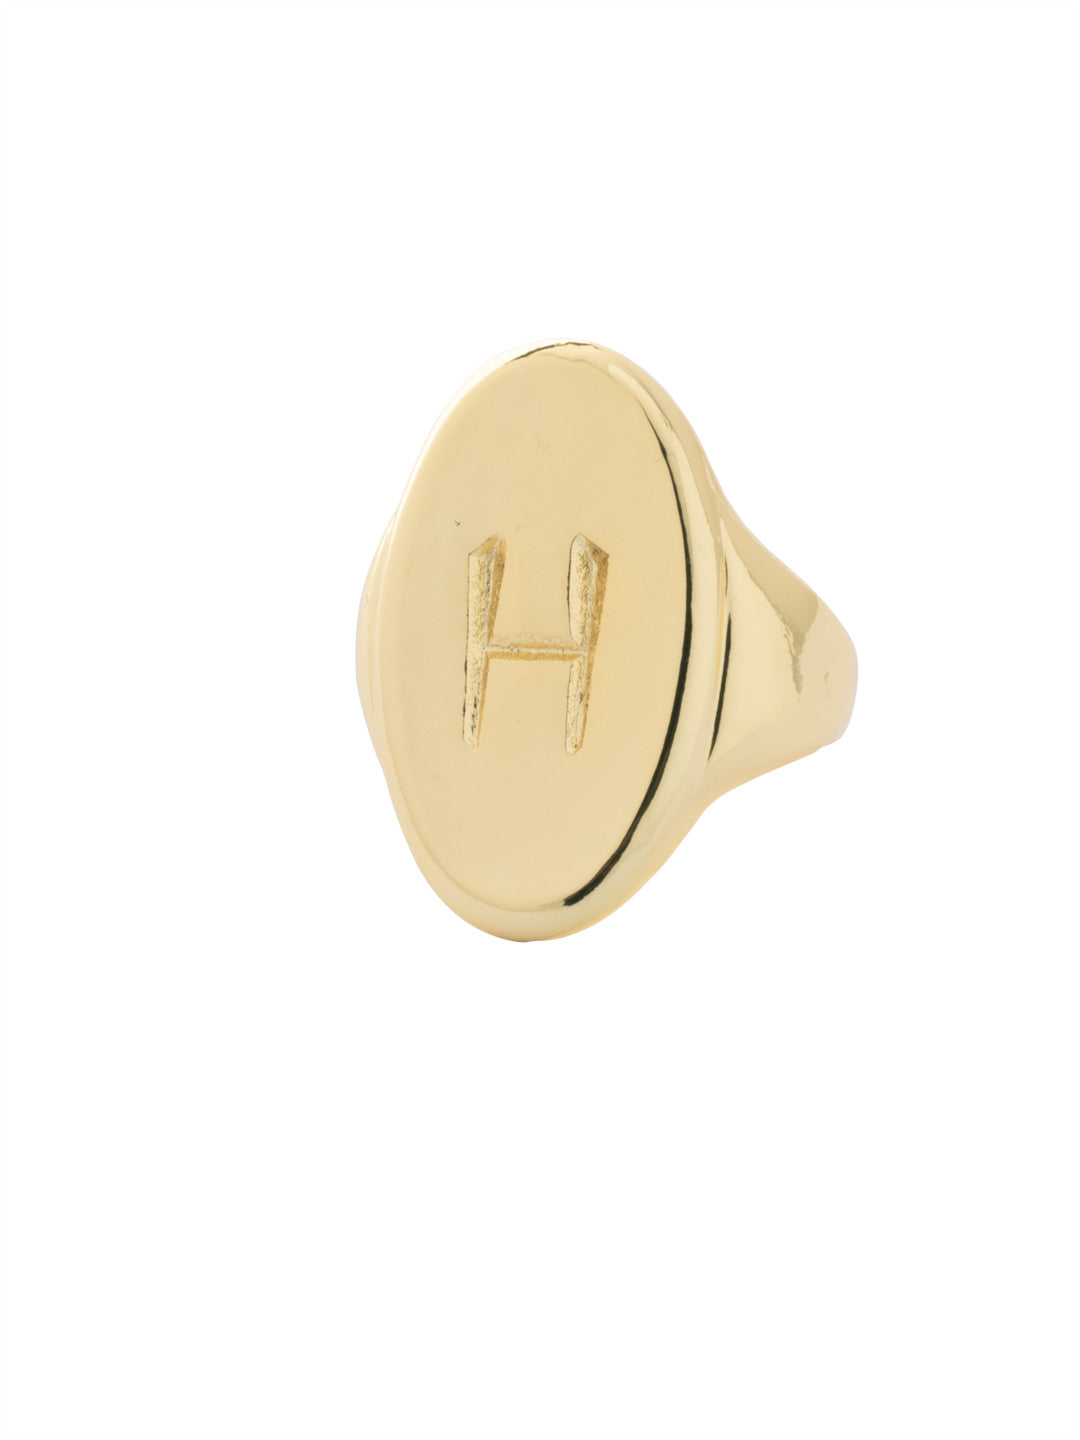 "H" Signet Statement Ring - RFK37BGMTL - <p>The Signet Statement Ring features a capital letter stamped into an oblong metal disk on an adjustable ring band. From Sorrelli's Bare Metallic collection in our Bright Gold-tone finish.</p>